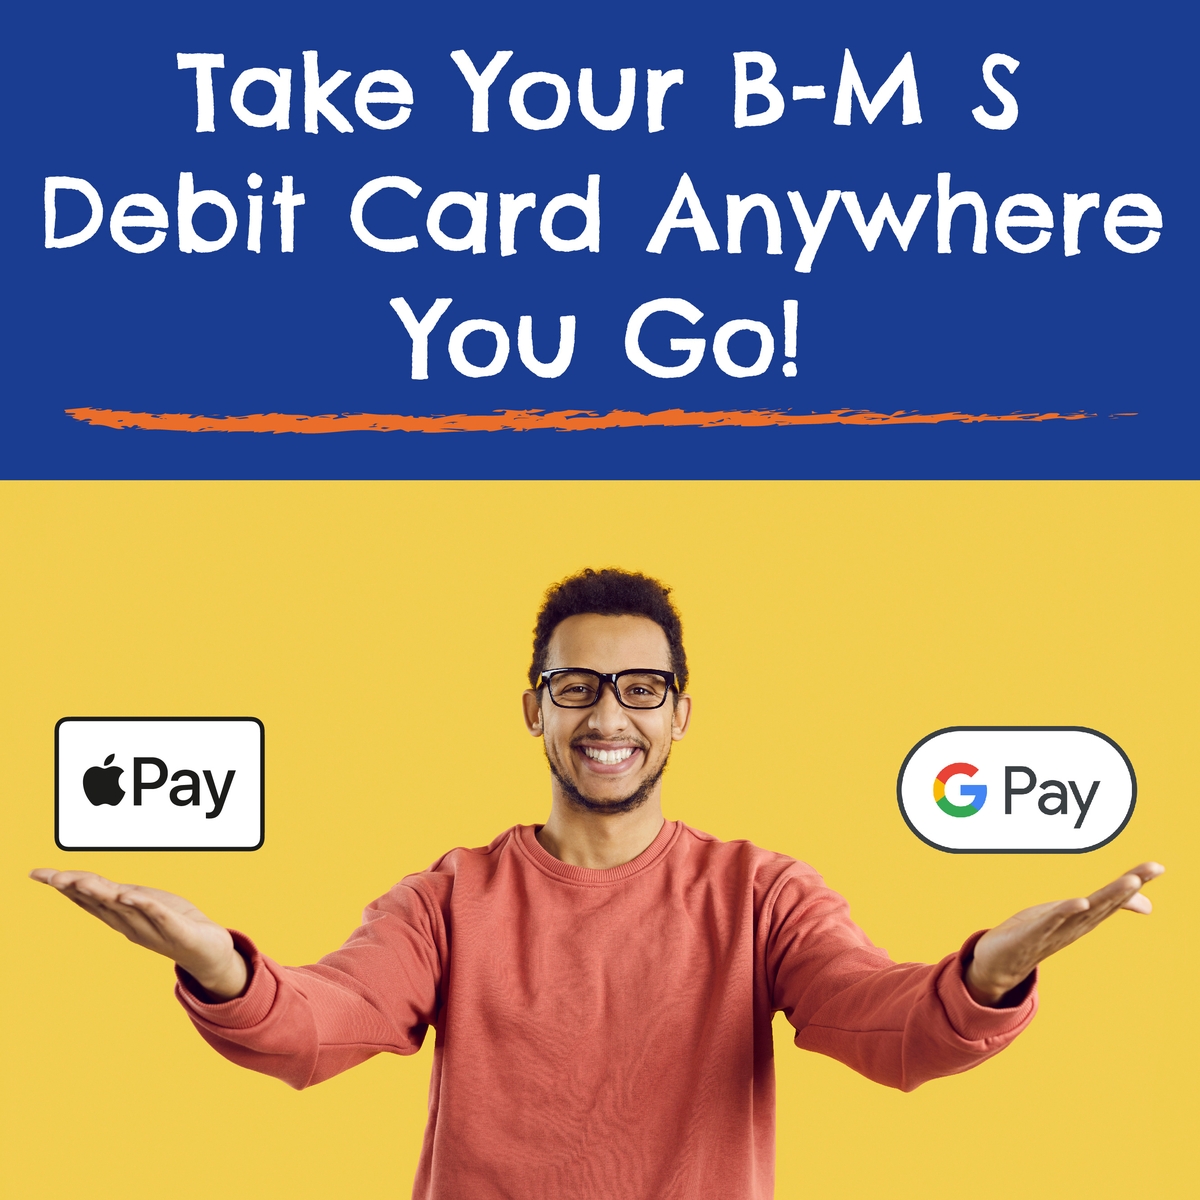 Take Your B-M S Debit Card Anywhere You Go!